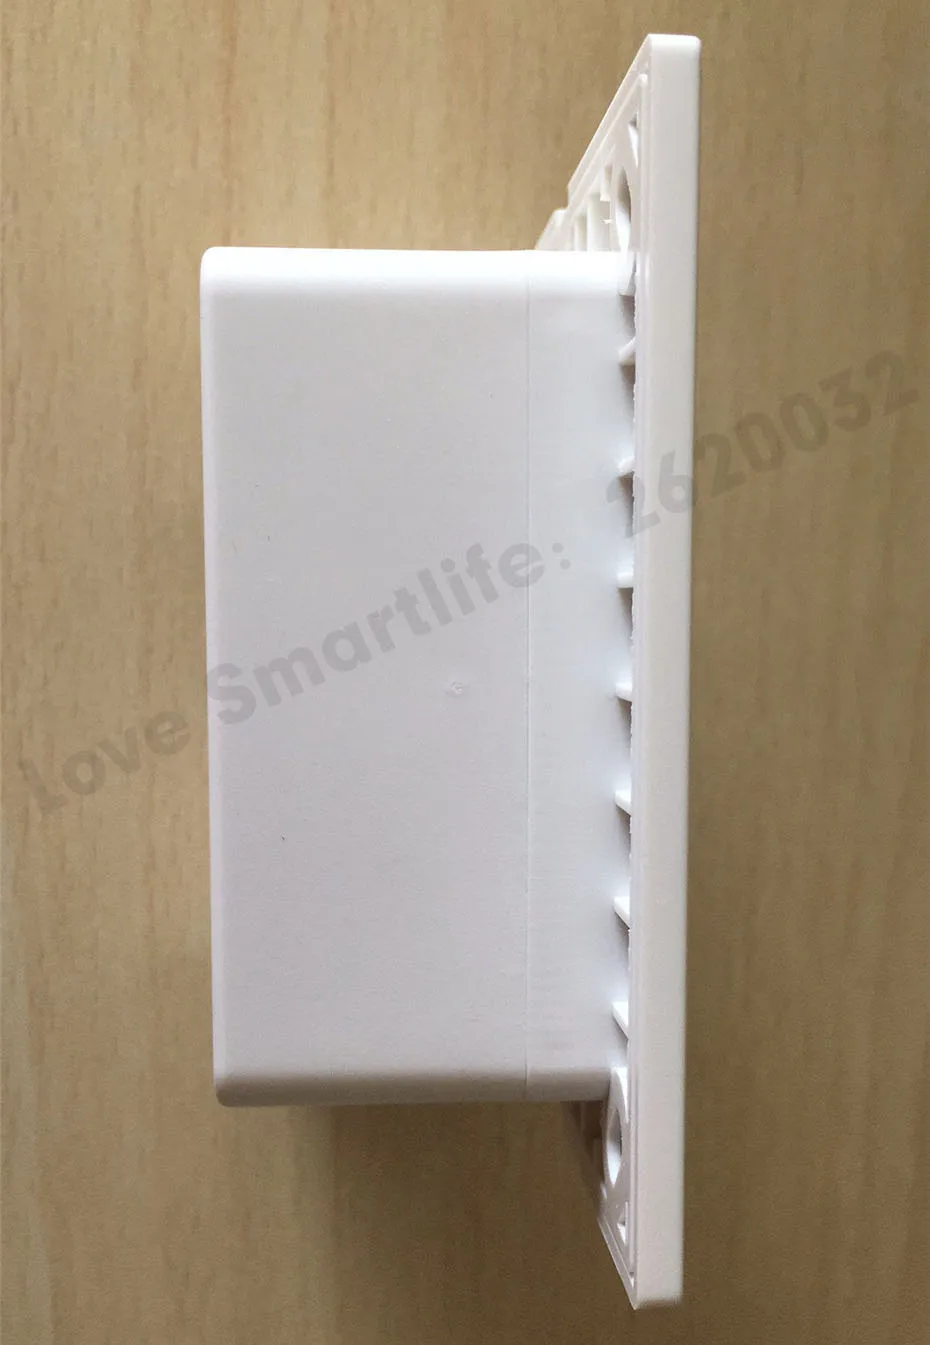 Dooya DC227A Single Channel RF433 Wall Receiver,fit Dooya S Motor S Tubular Blinds,work with Dooya RF433 Emitters like DC2700-5